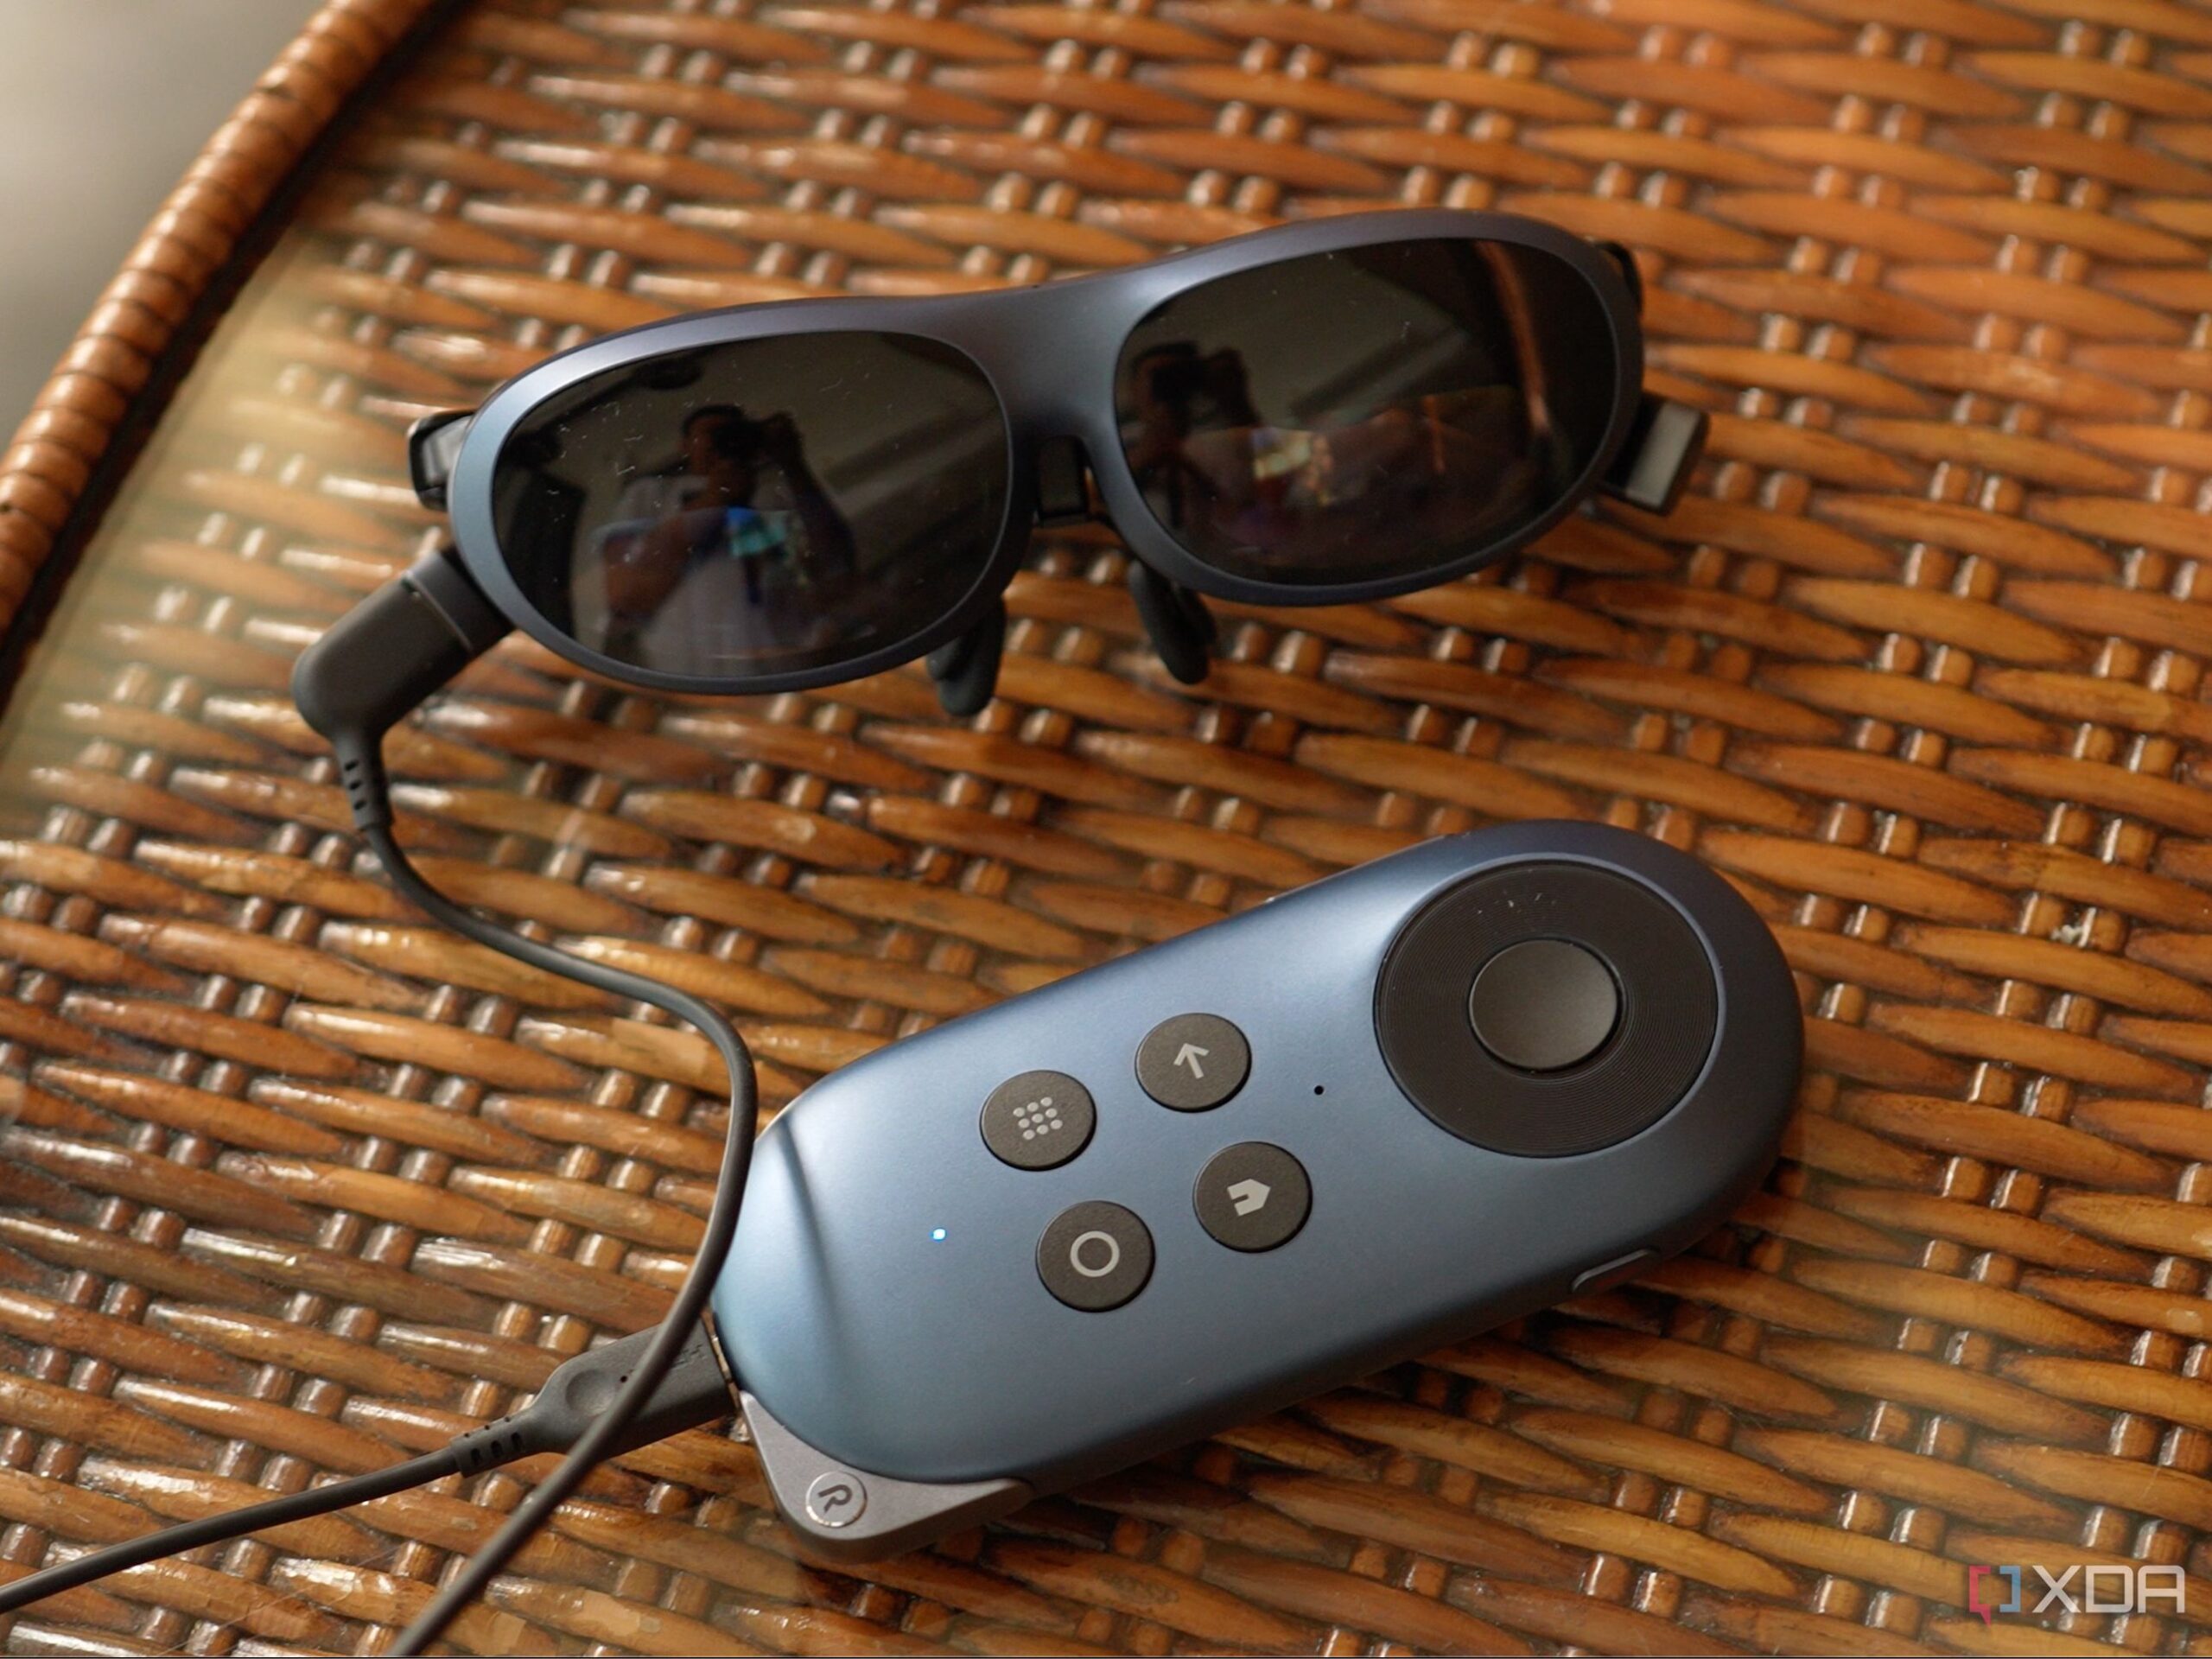 rokid-station-review:-the-first-android-tv-box-for-ar-glasses-is-a-no-frills-affair